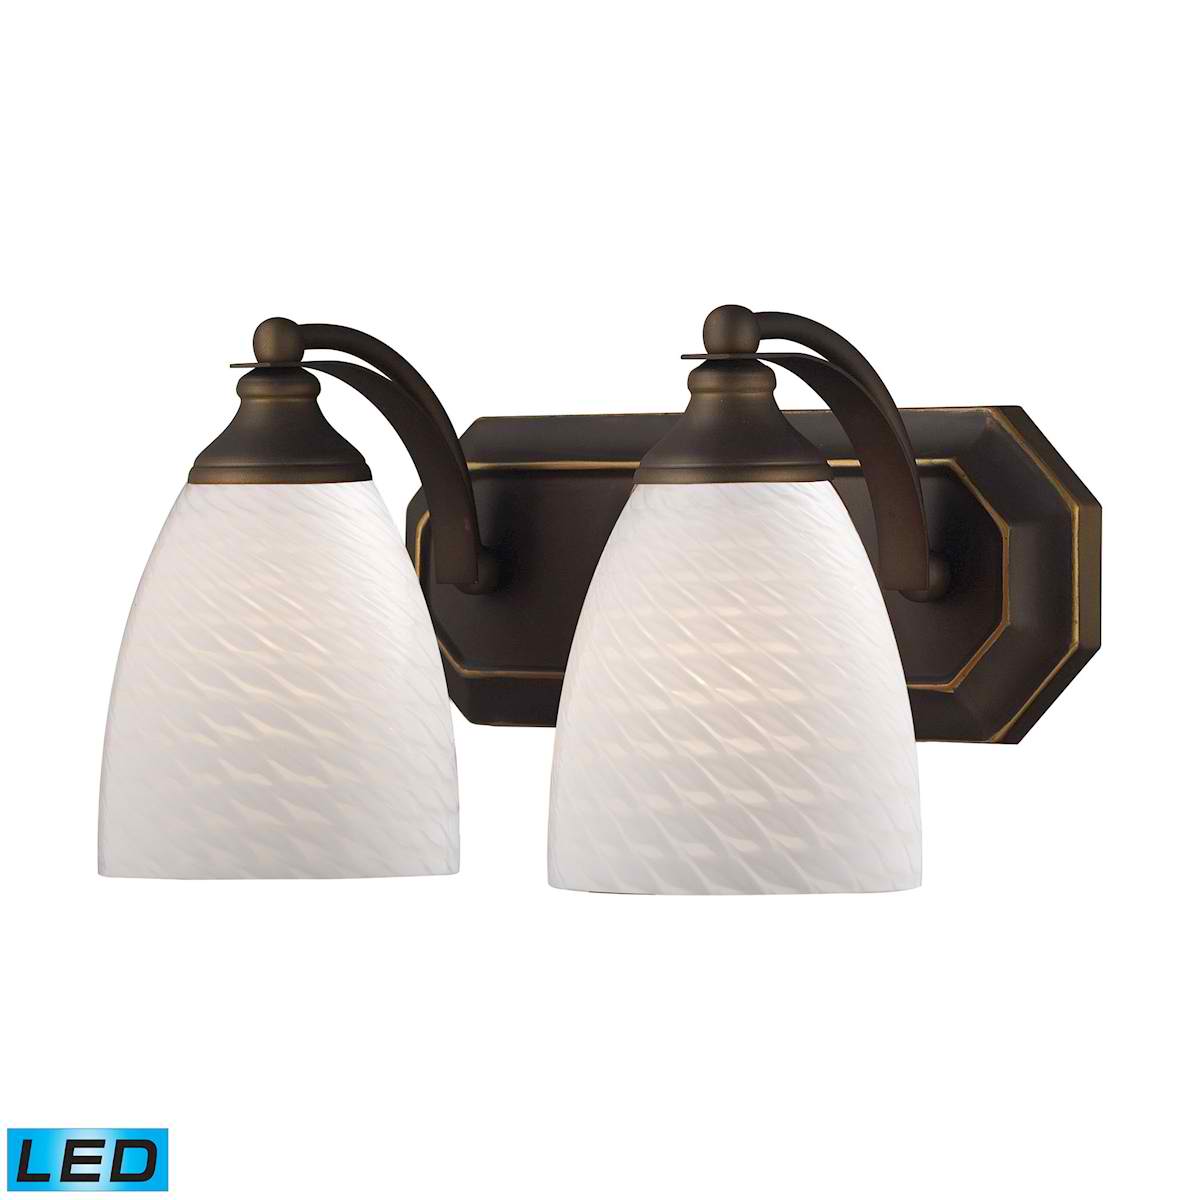 2 Light Vanity in Aged Bronze and White Swirl Glass - LED, 800 Lumens (1600 Lumens Total) with Full Scale